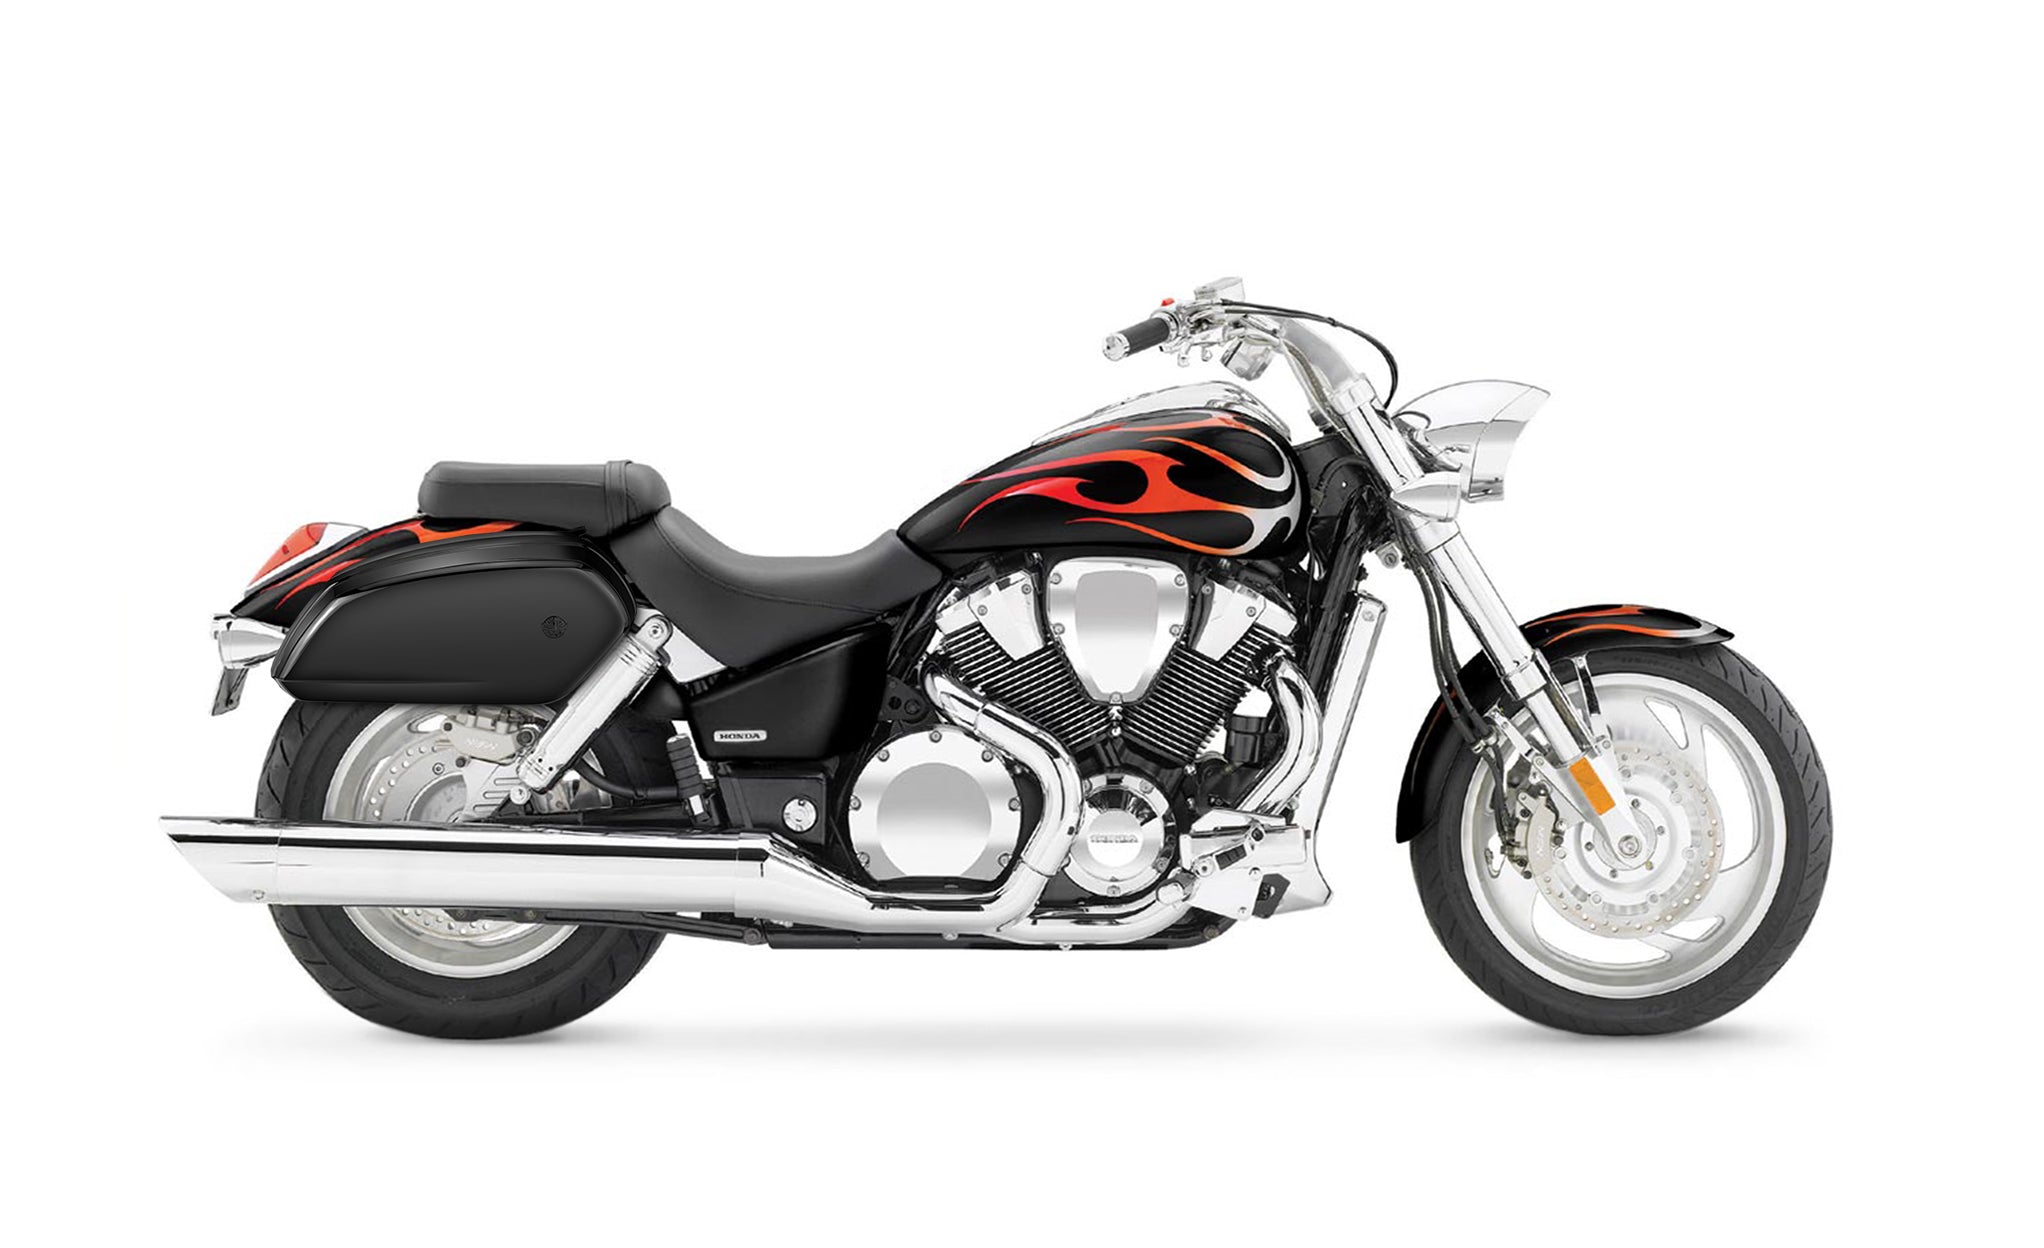 Viking Viper Large Honda Vtx 1800 C Painted Motorcycle Hard Saddlebags Engineering Excellence with Bag on Bike @expand